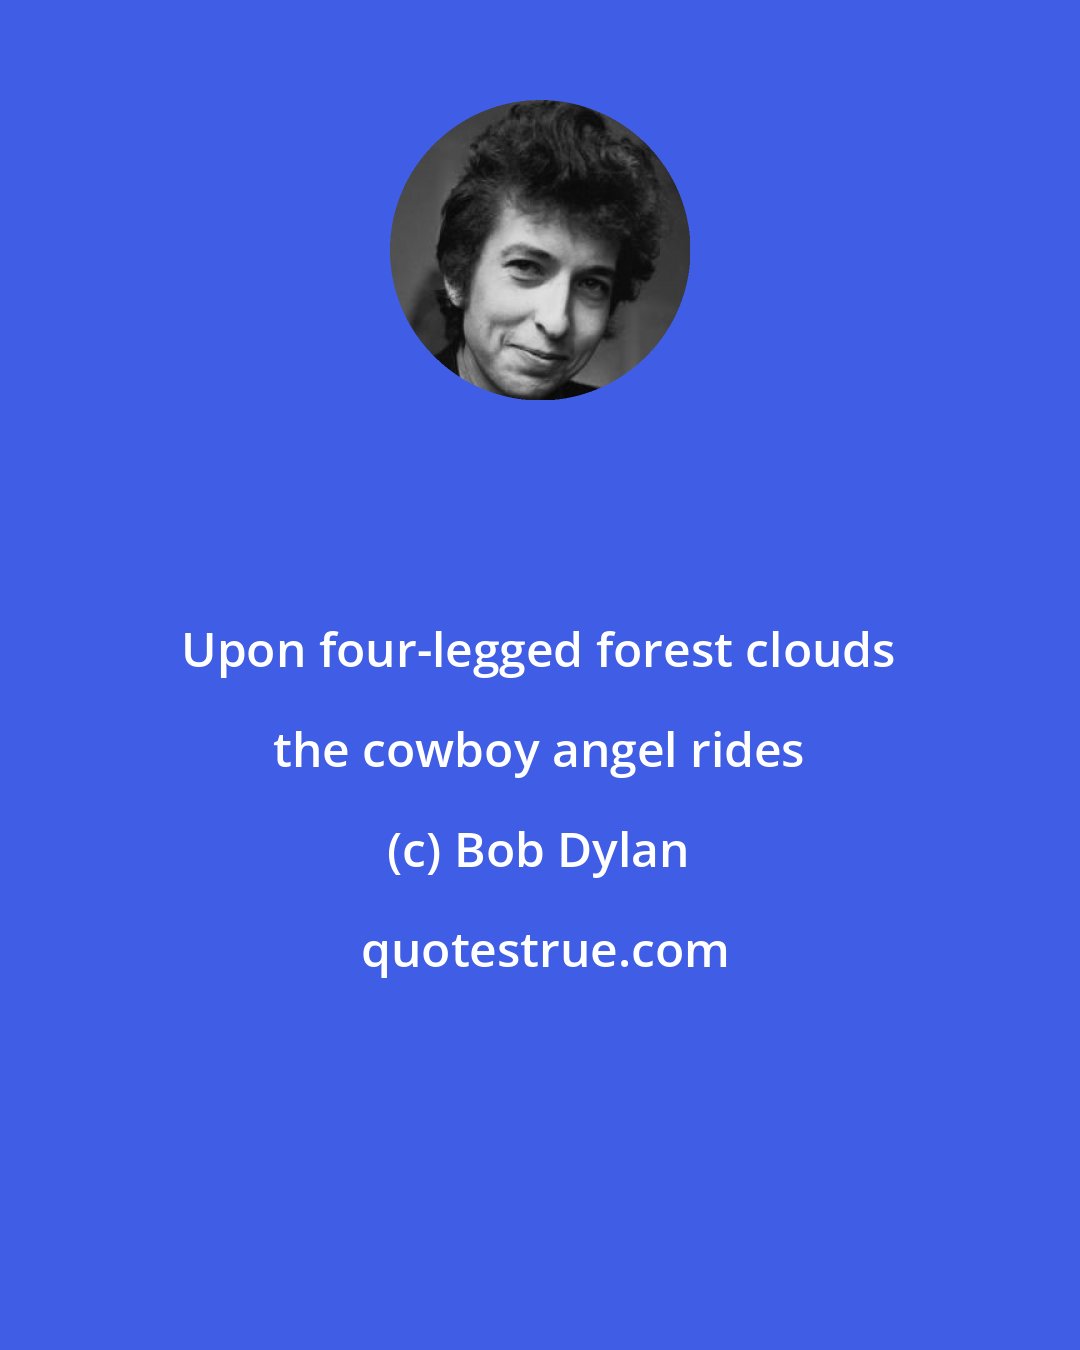 Bob Dylan: Upon four-legged forest clouds the cowboy angel rides